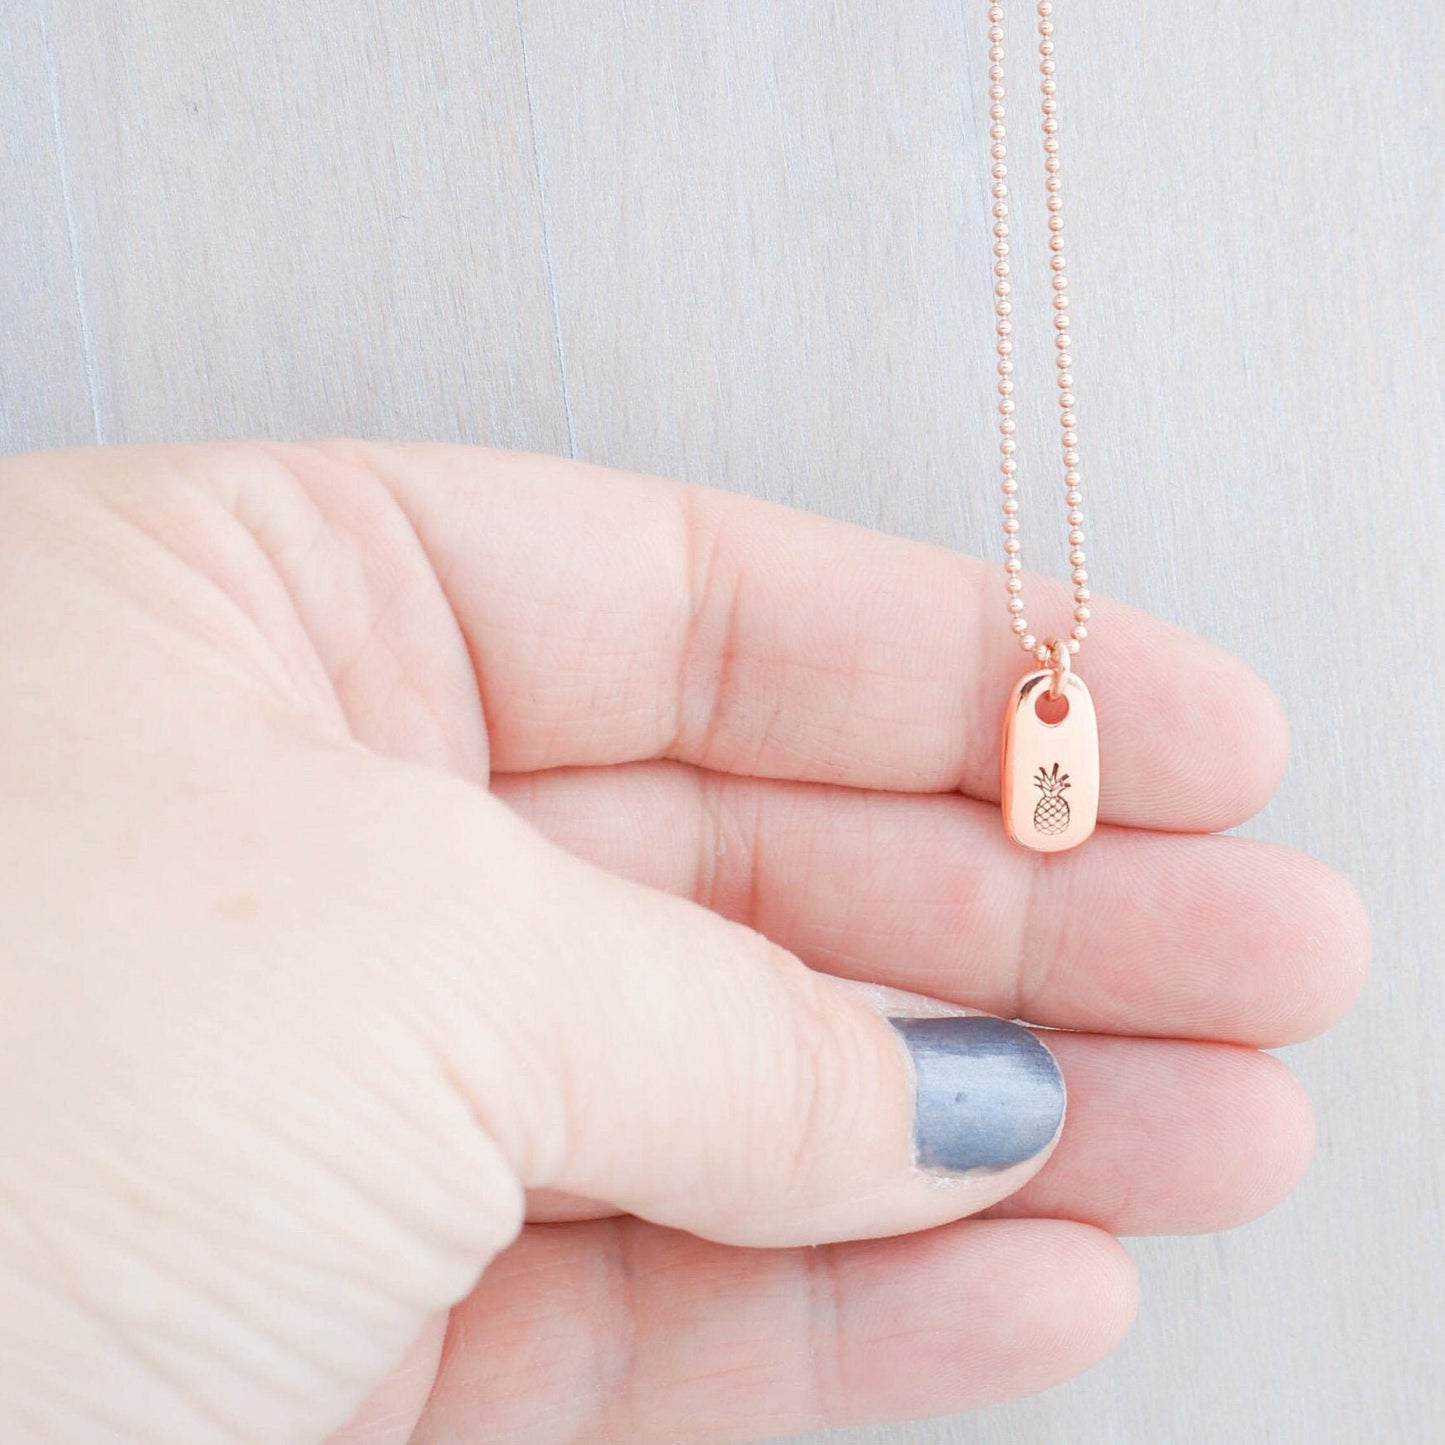 Dainty rose gold pineapple necklace in hand